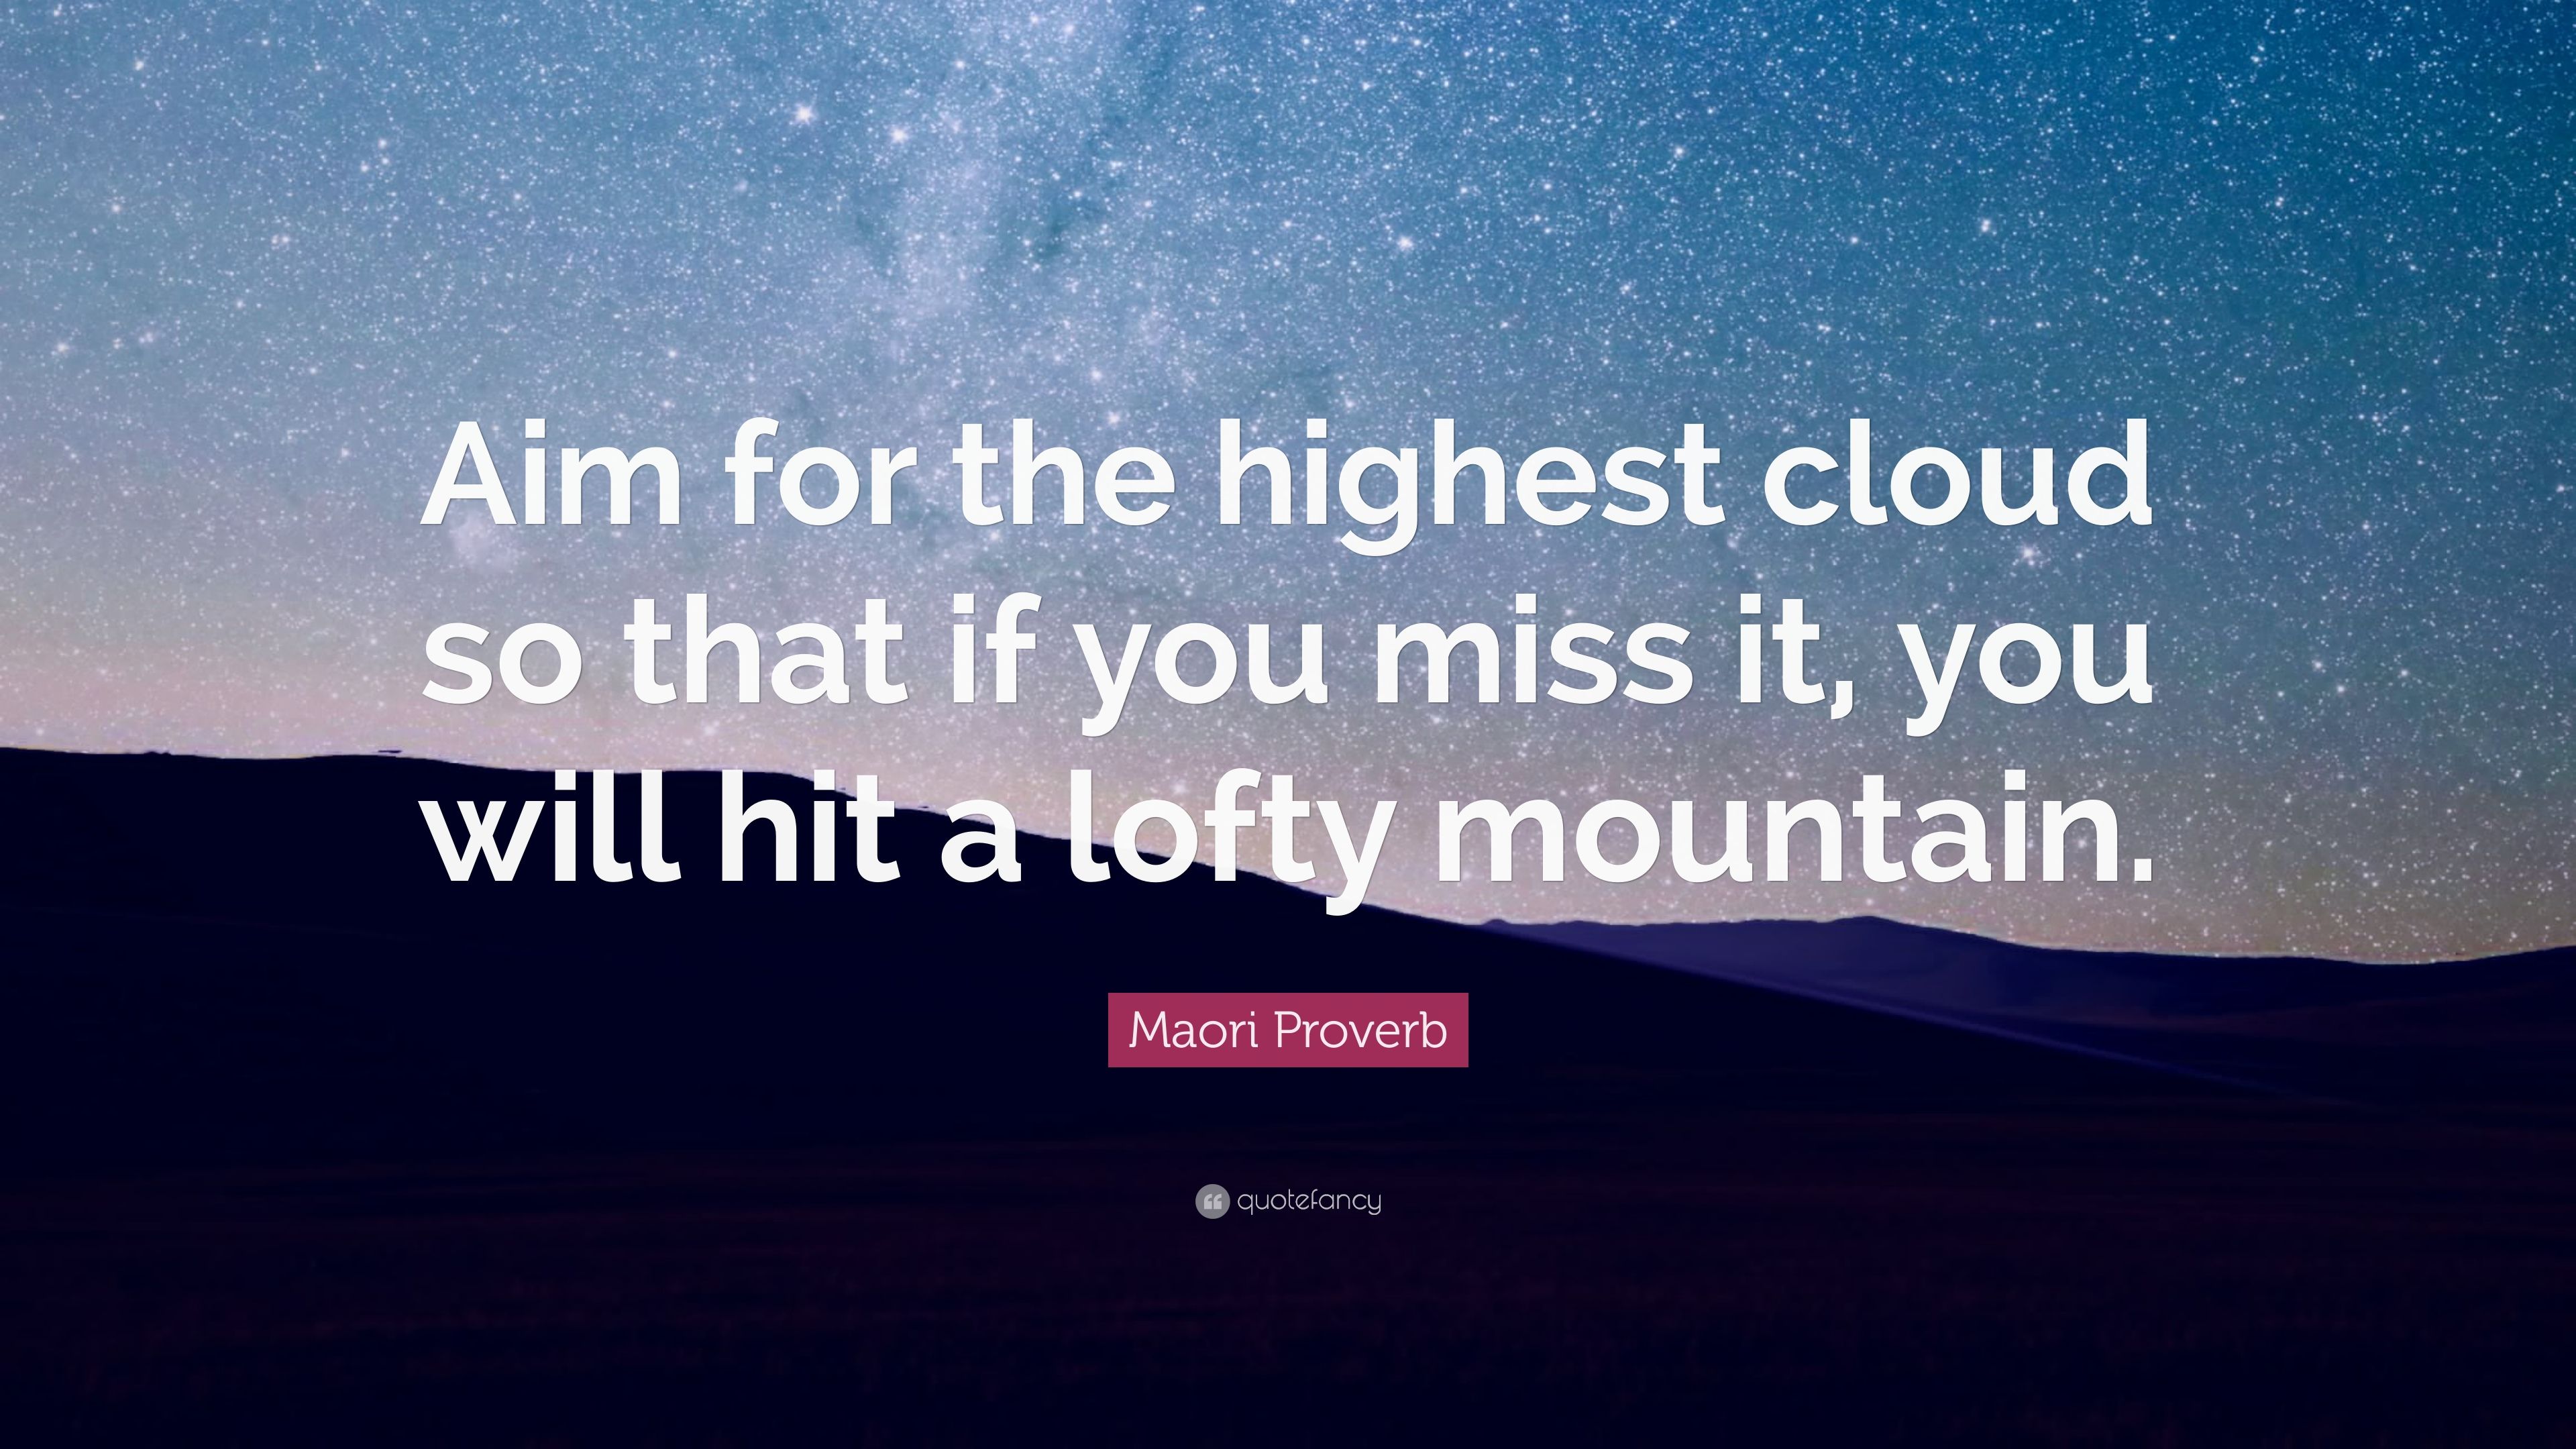 Maori Proverb Quote: “Aim for the highest cloud so that if you ...